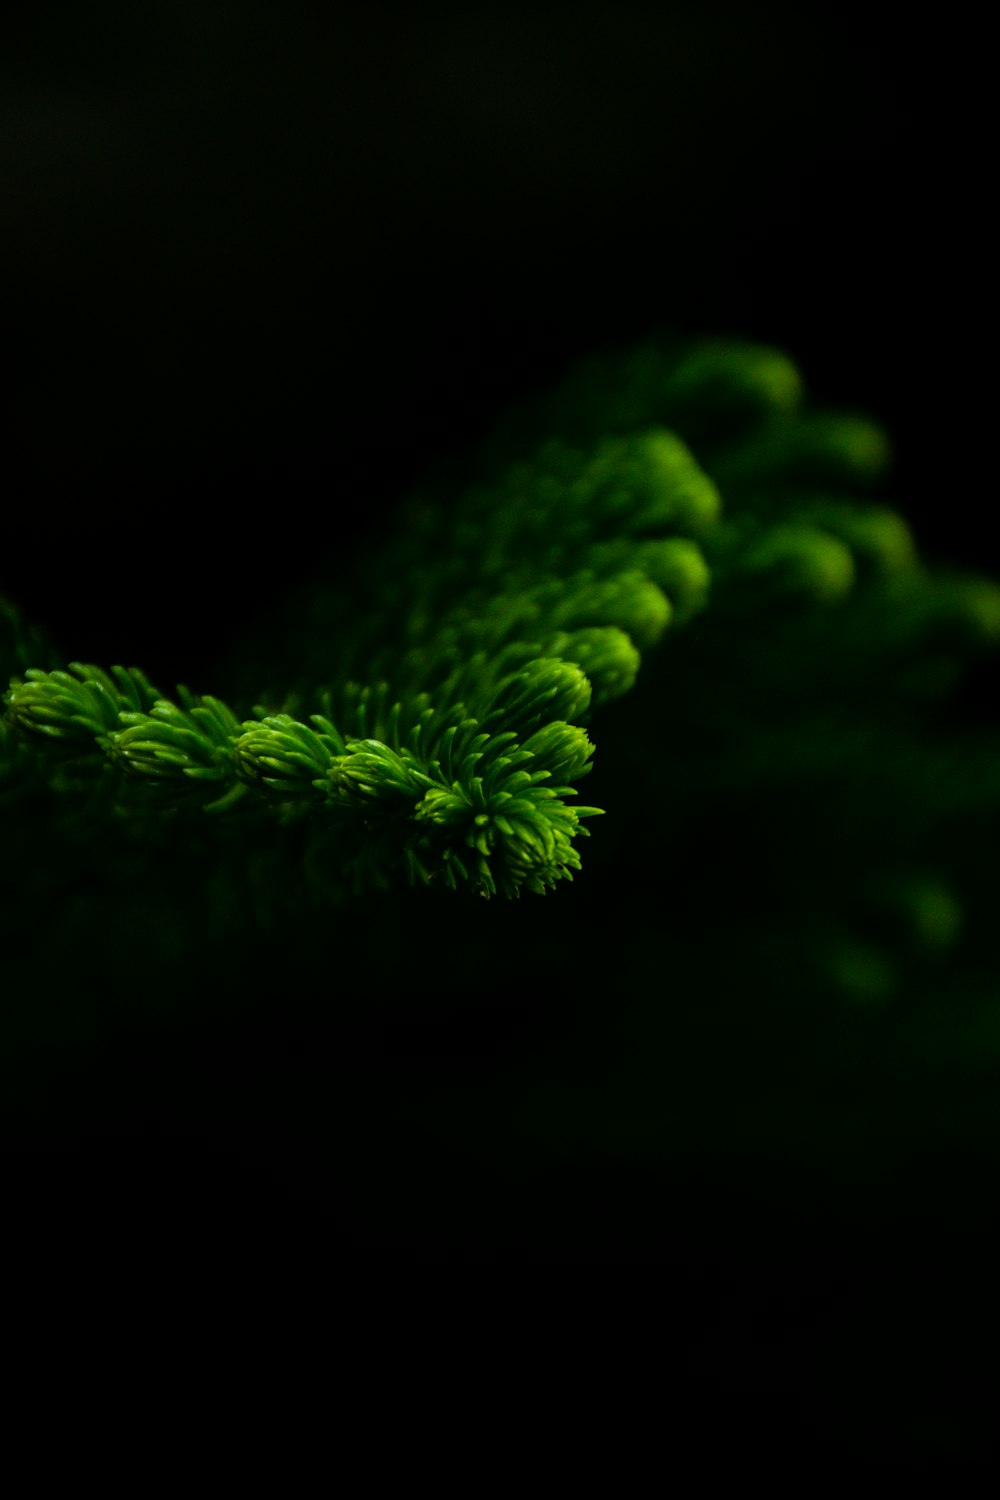 a close up of a green tree branch